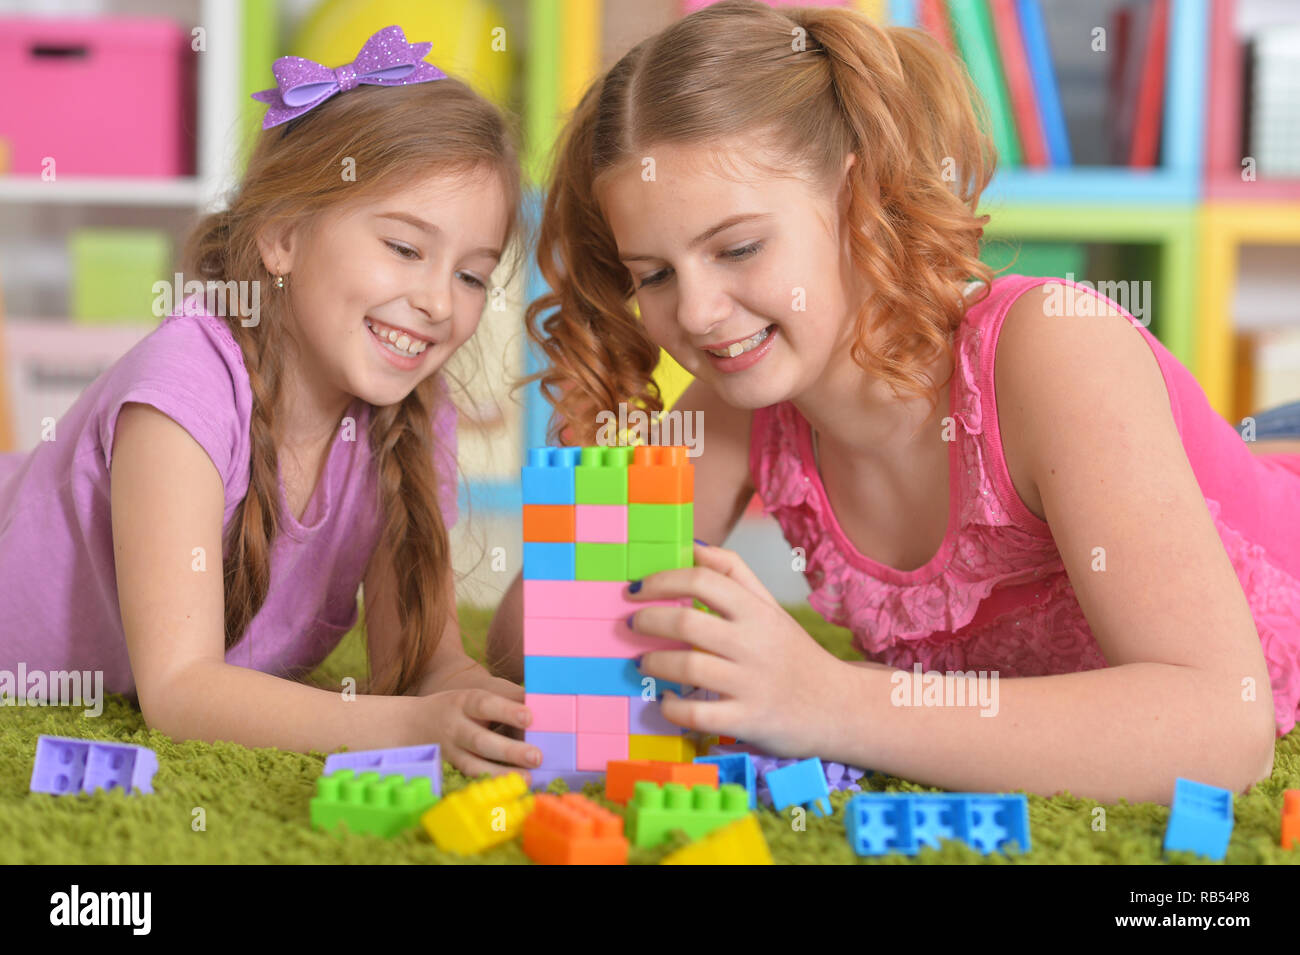 Cute girls playing with colorful plastic blocks Stock Photo